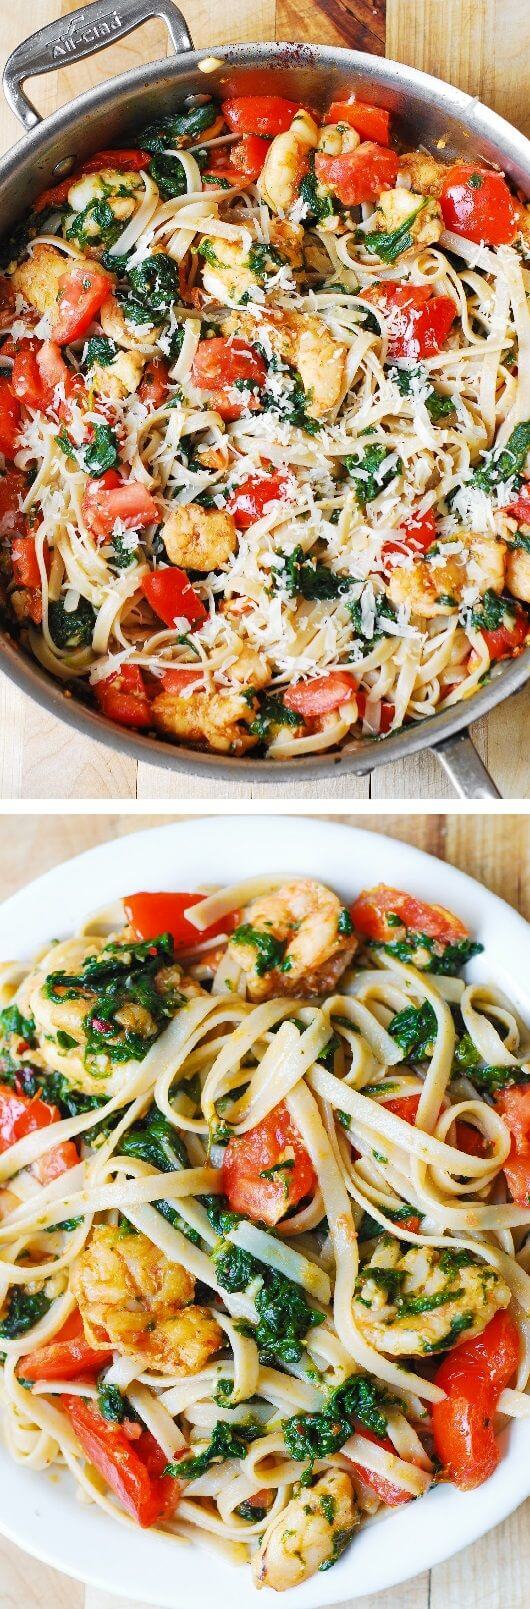 We gathered some of the best ways to make a simple dinner recipe for those quick meals during the week! There’s so much more at bitehaven.com